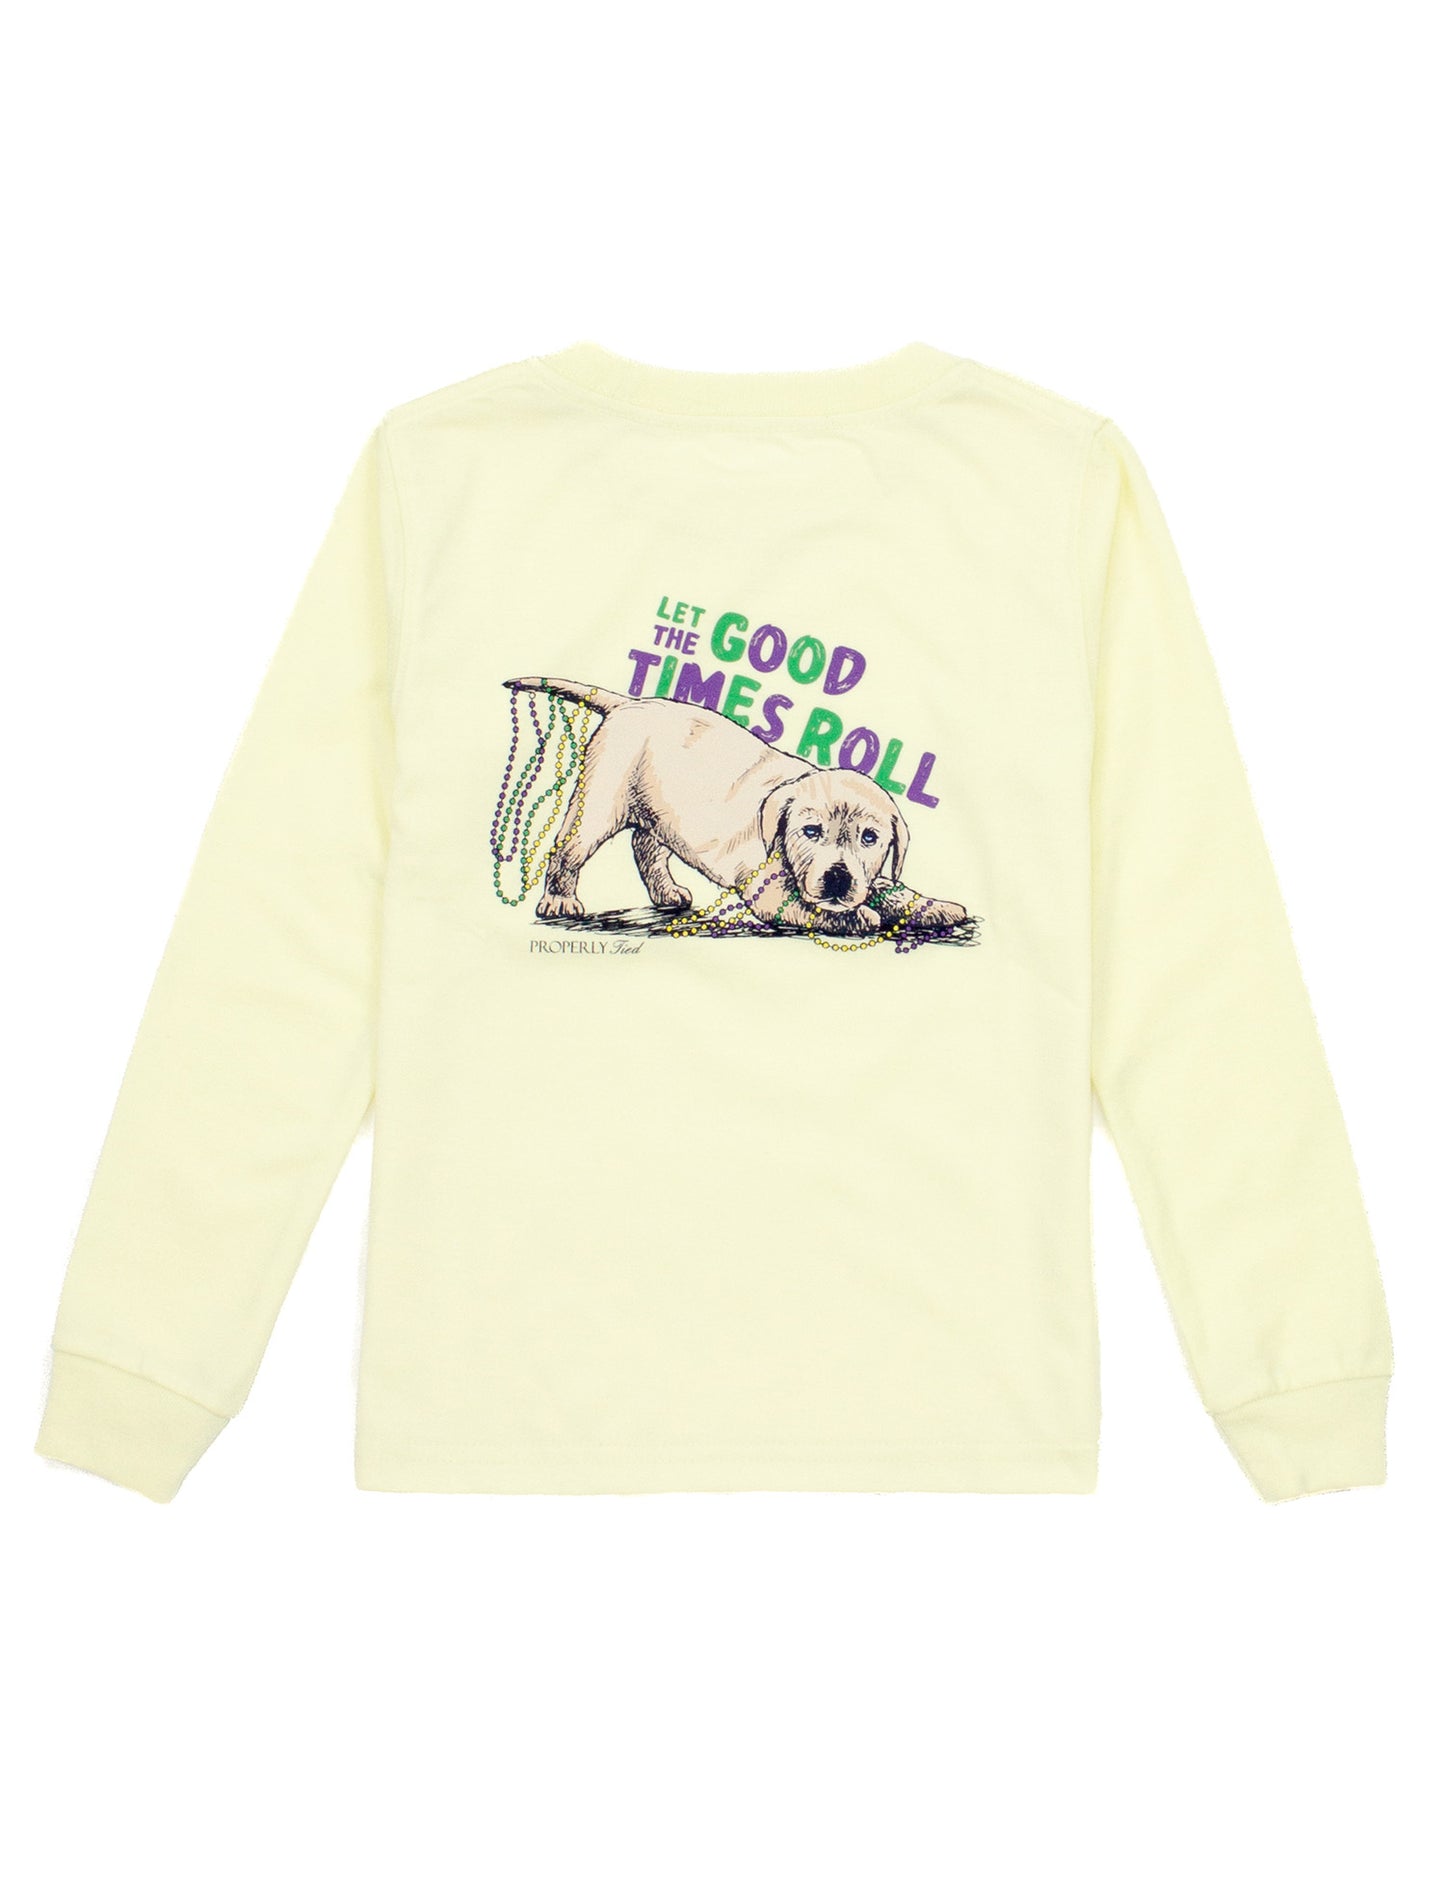 An adorable Pawdi Gras Properly Tied Long-Sleeve T-shirt for Kids featuring a dog, perfect for Pawdi Gras festivities.